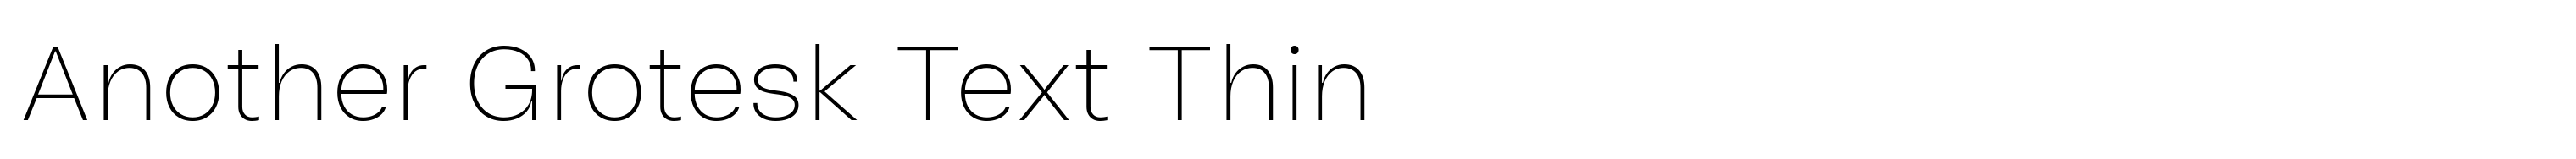 Another Grotesk Text Thin